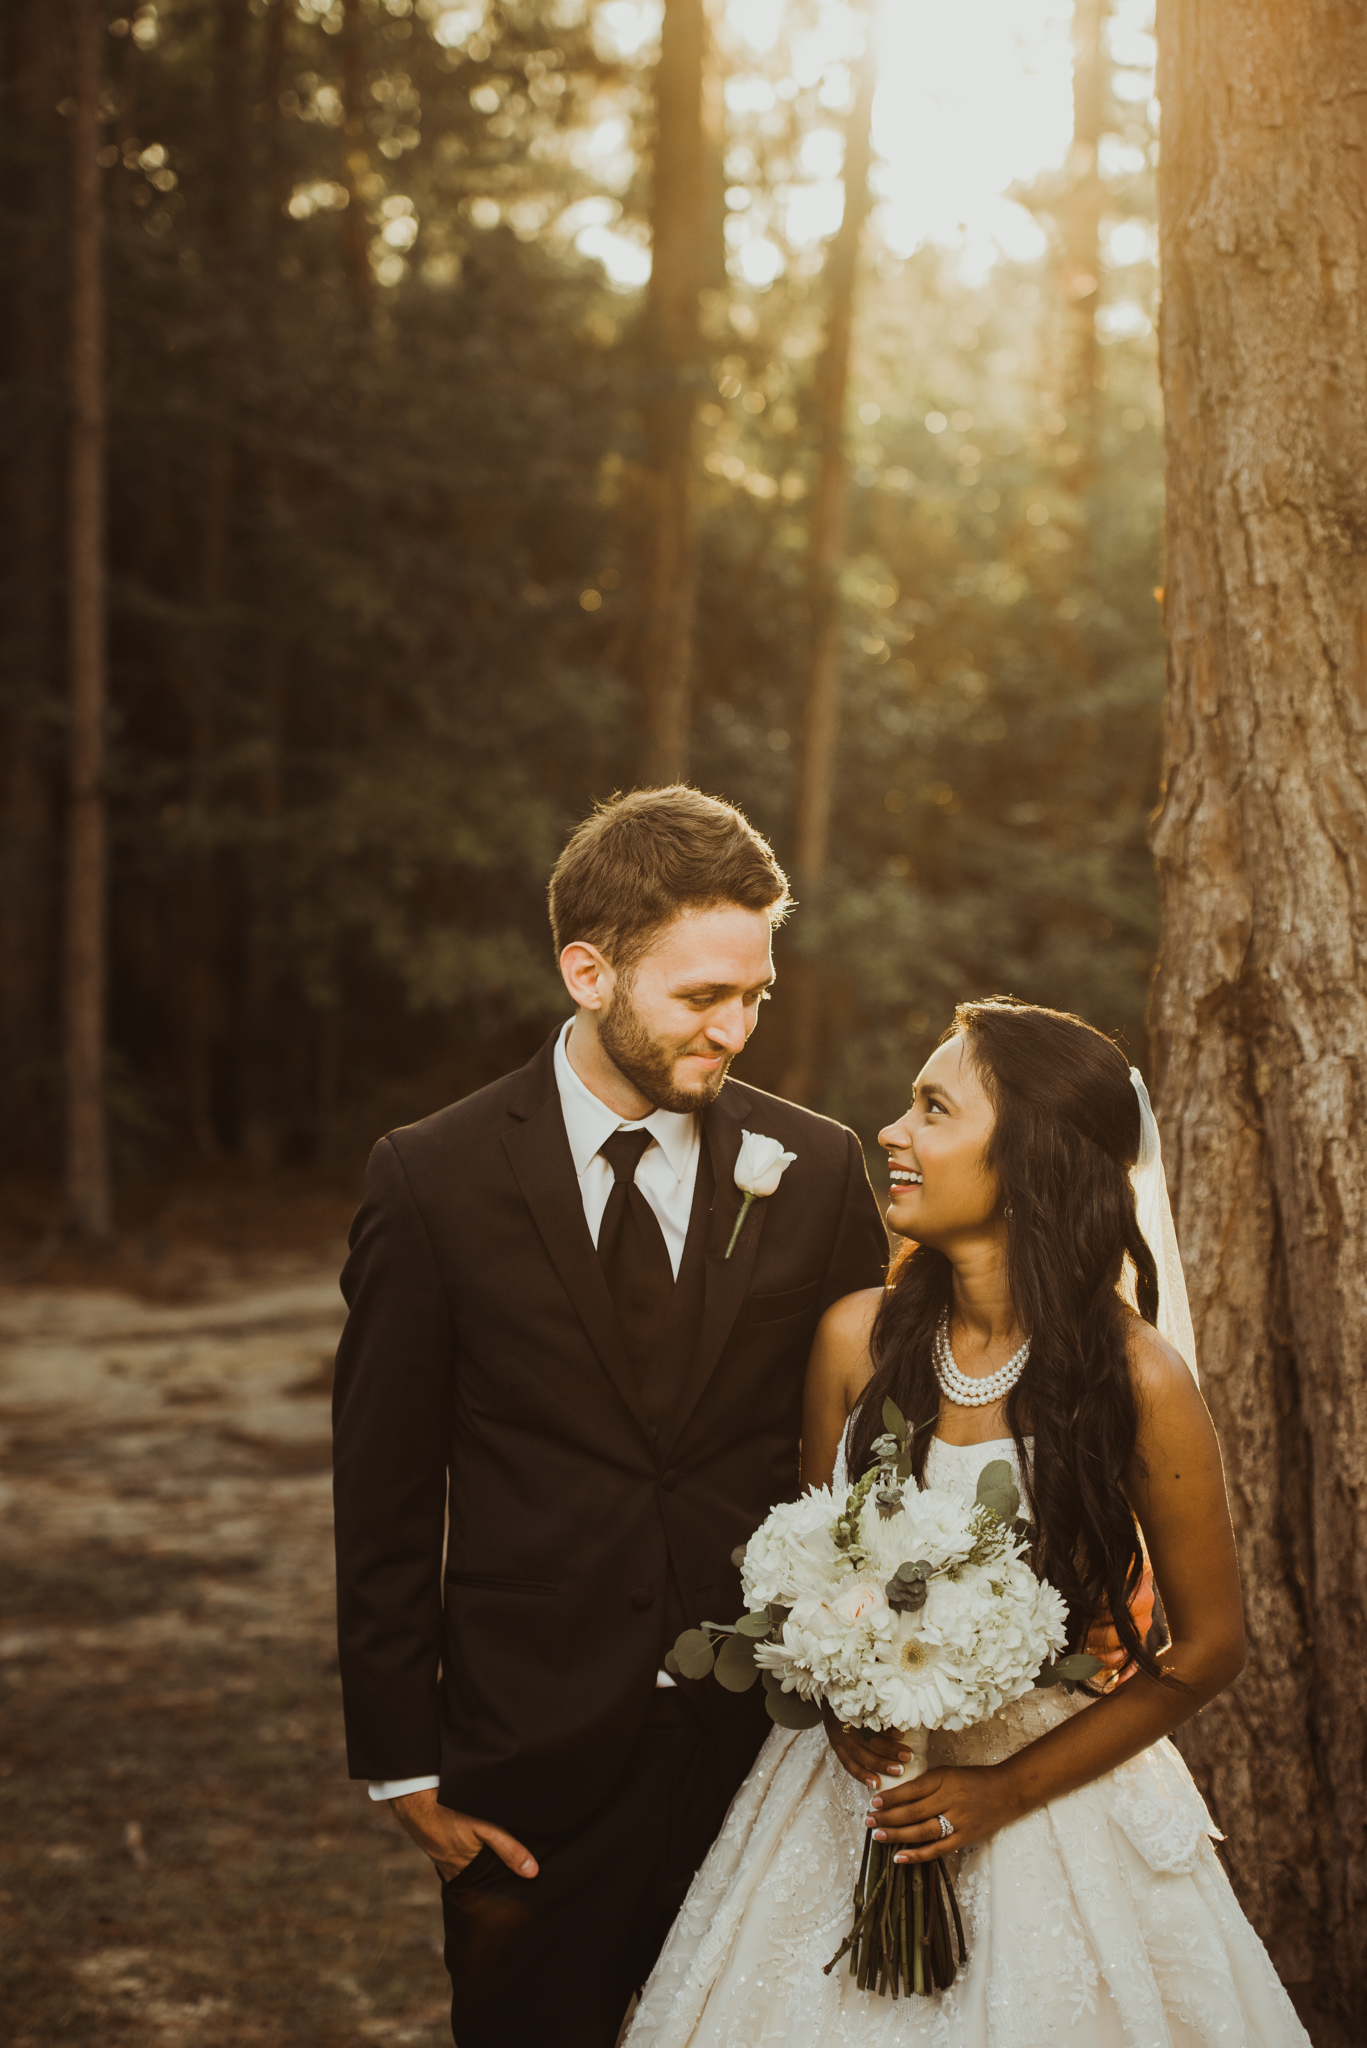 ©Isaiah & Taylor Photography - Lakeside Barn Wedding, Private Estate, Poplarville Mississippi-88.jpg